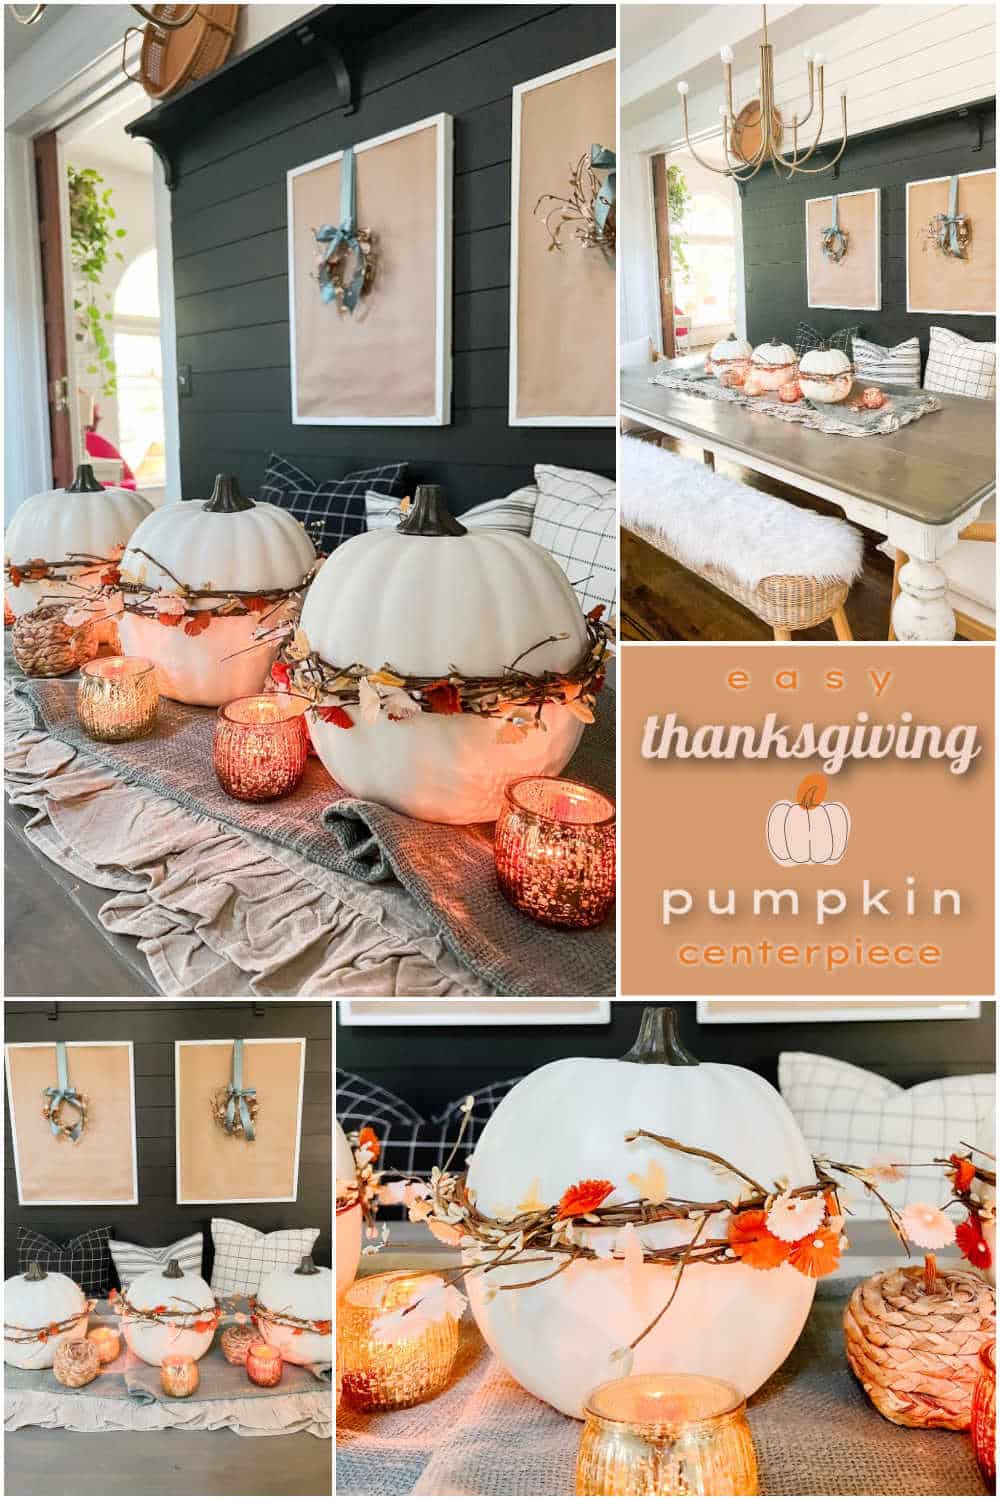 Easy Thanksgiving Centerpiece. Whip up this easy 3-pumpkin centerpiece for Thanksgiving in minutes!